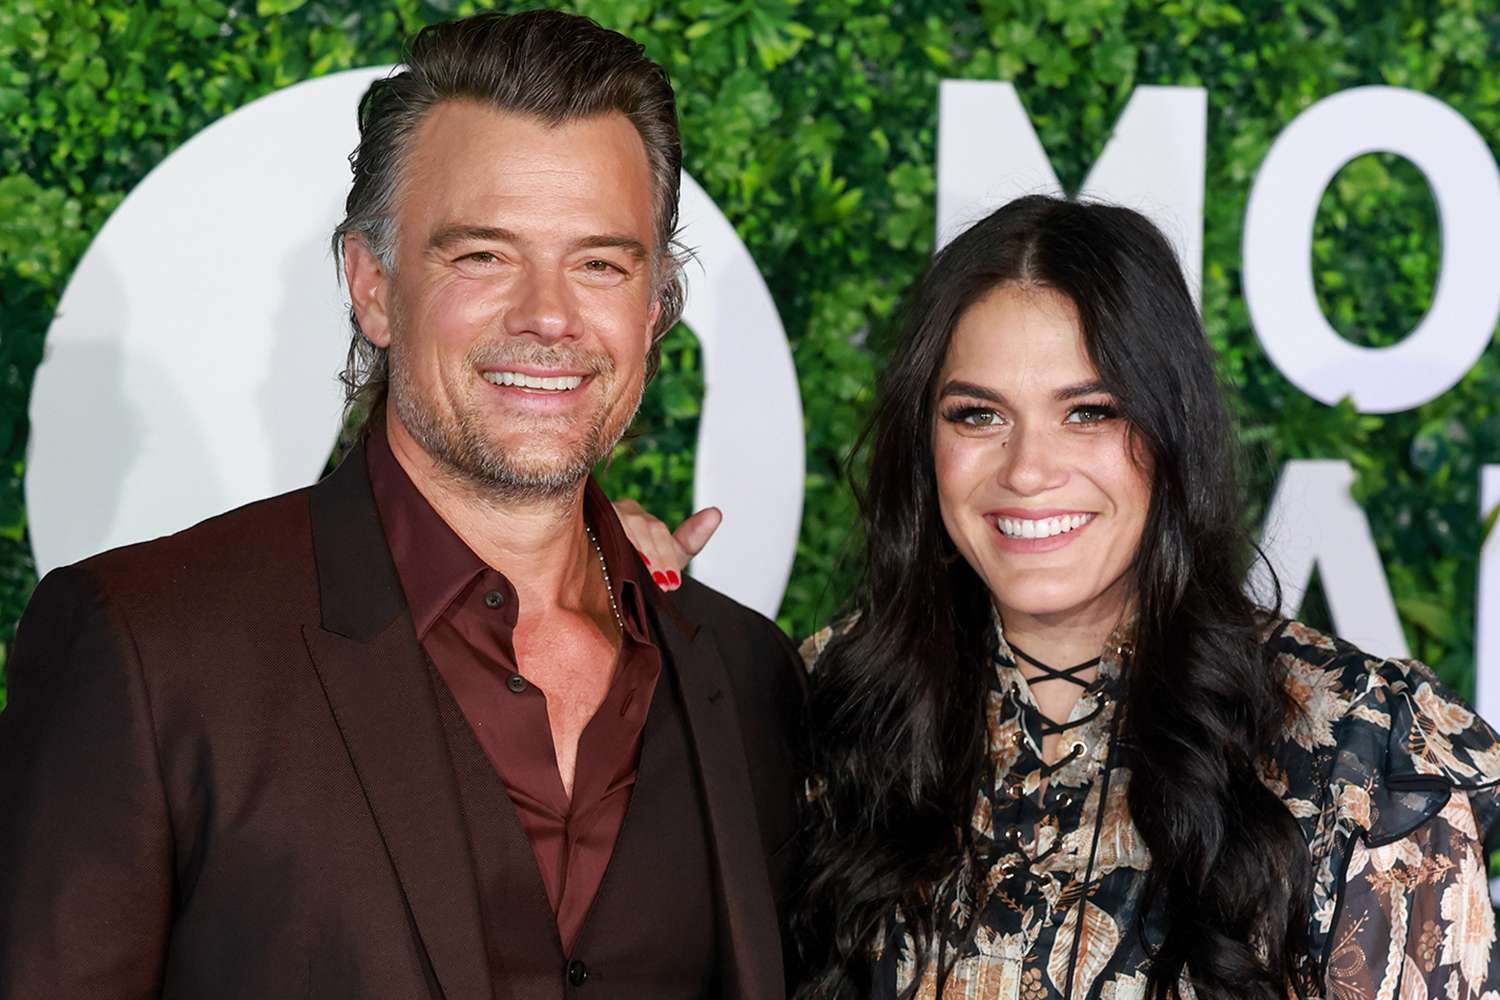 Josh Duhamel Celebrates Wife Audra Mari on Her First Mother's Day: 'Beyond Blessed to Have You in Our Lives'